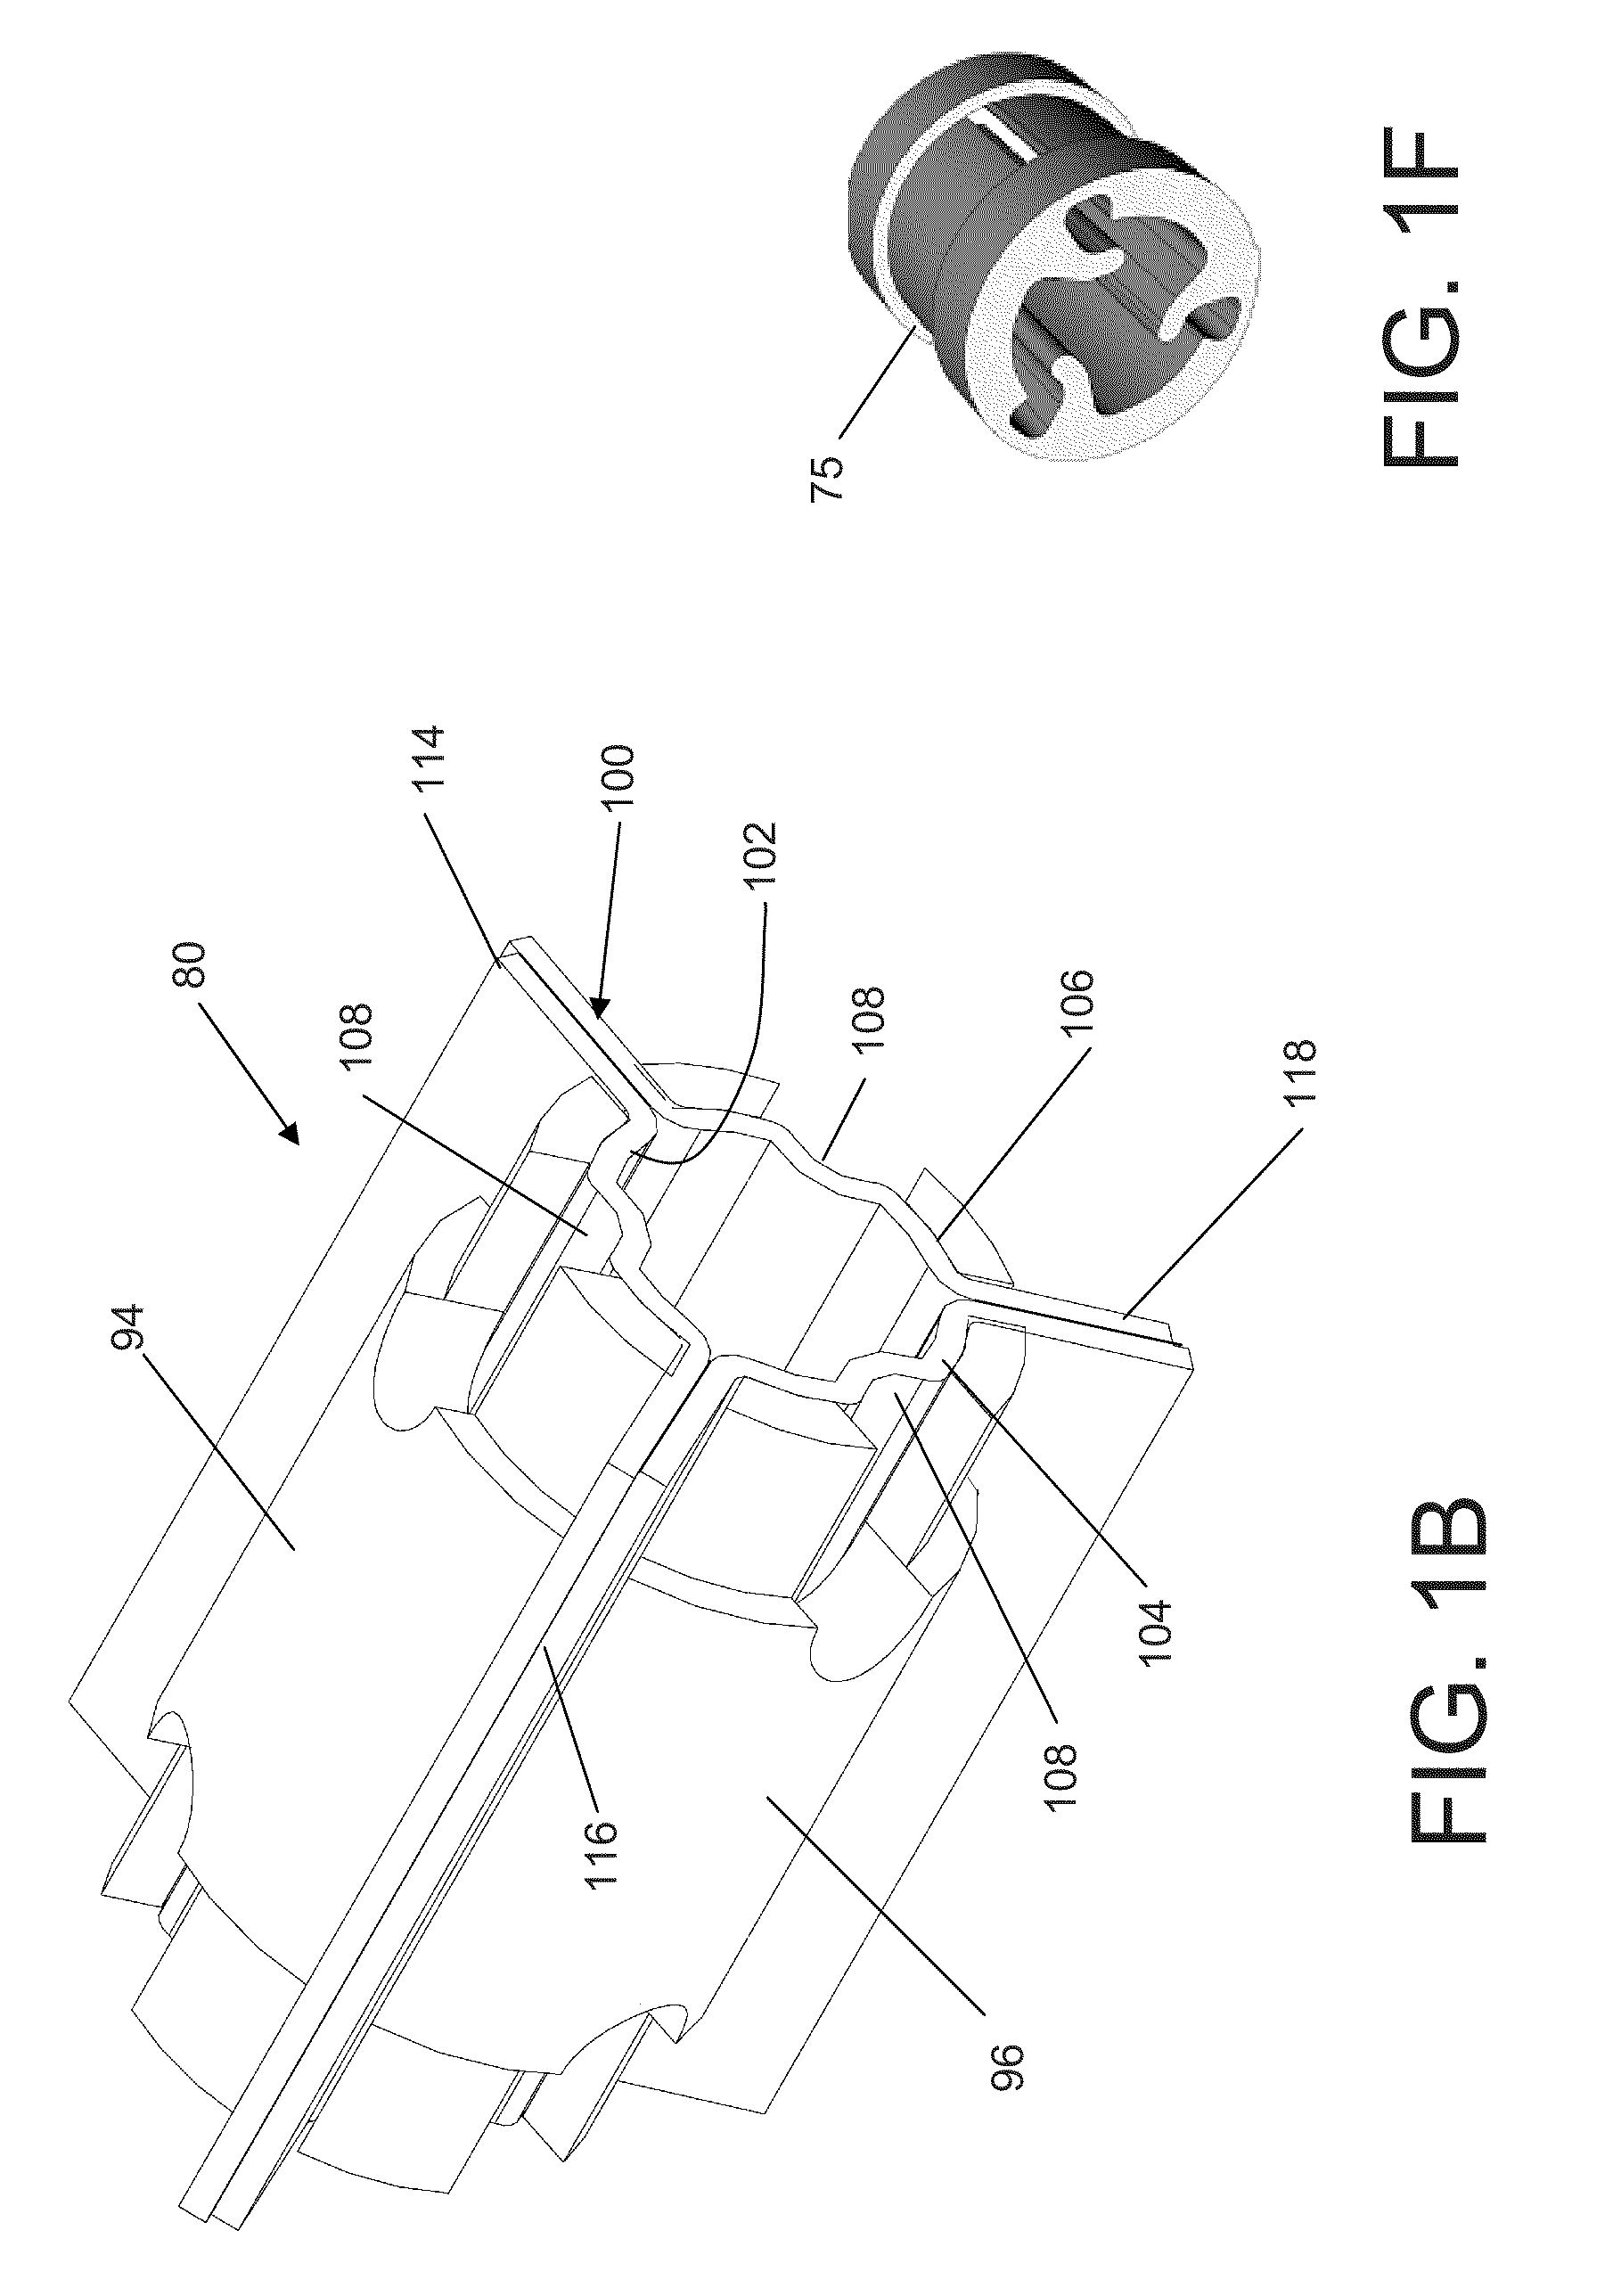 Method of fabricating stimulation lead by fusing connector segment between lead body and electrode portion of the lead